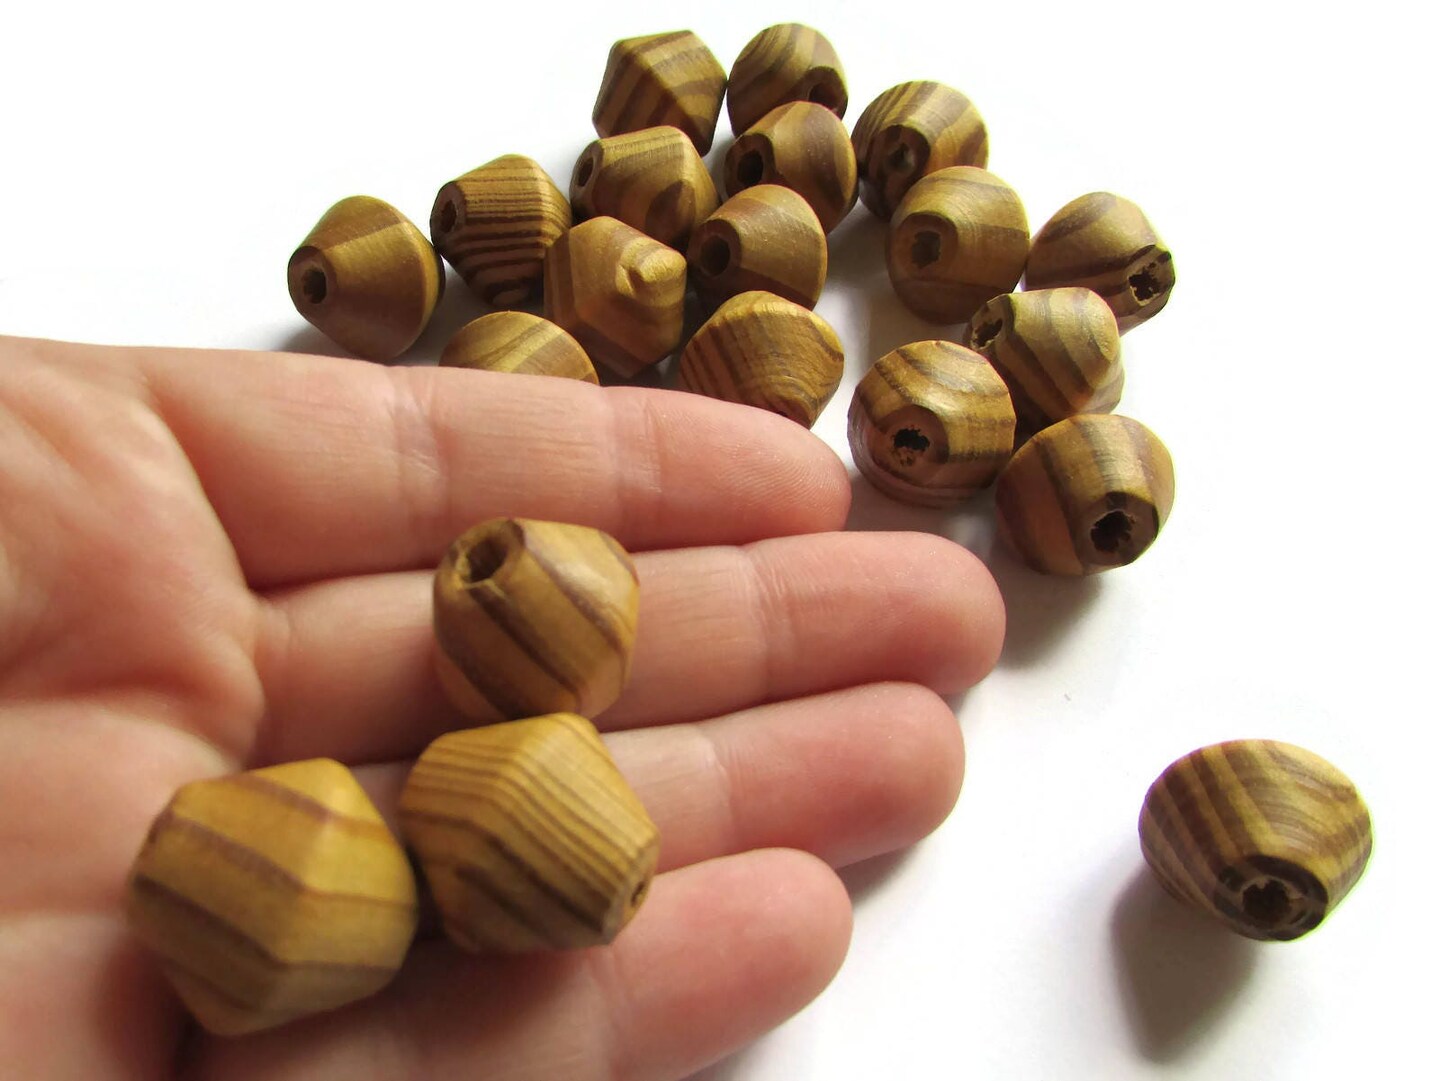 20 17mm Large Brown Wooden Bicone Beads bH3